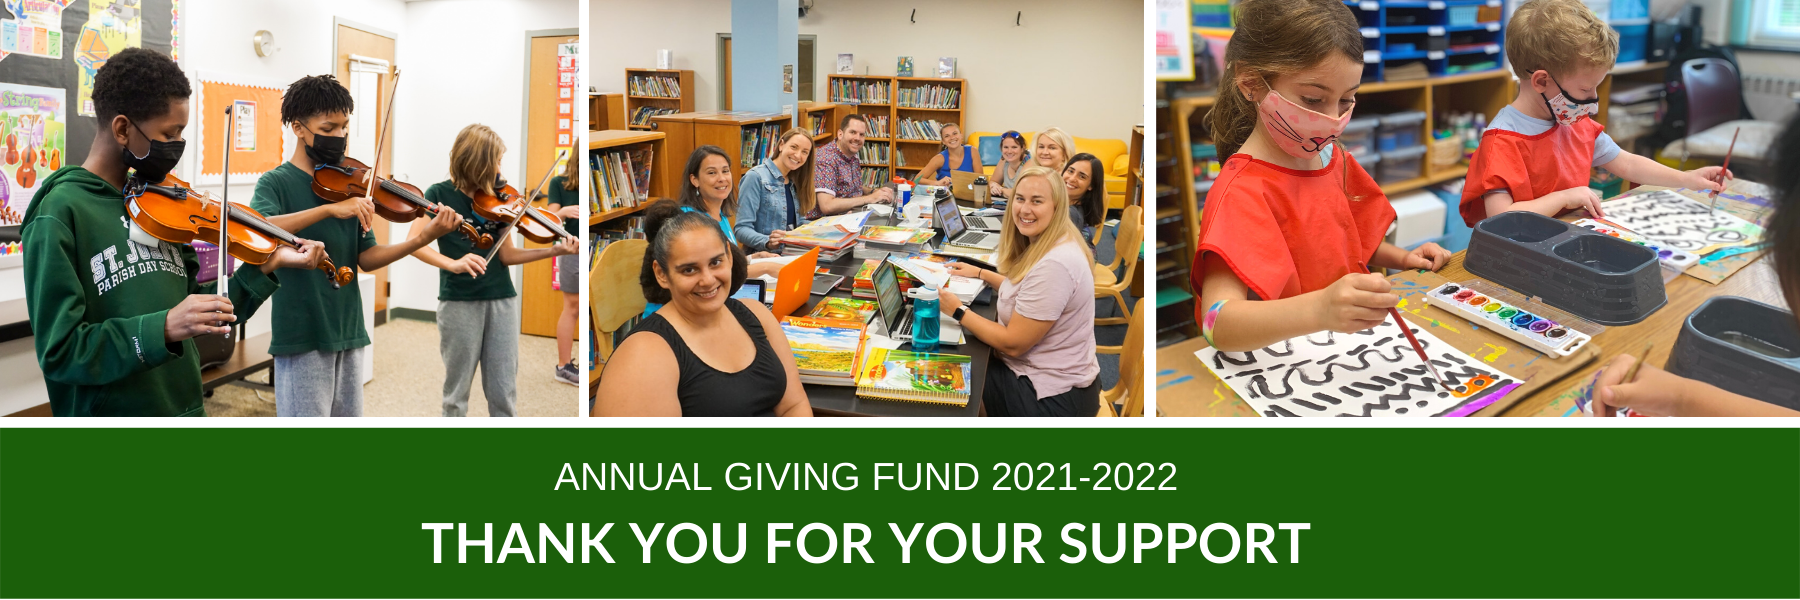 Thank you for supporting Annual Fund 2021-22 image banner